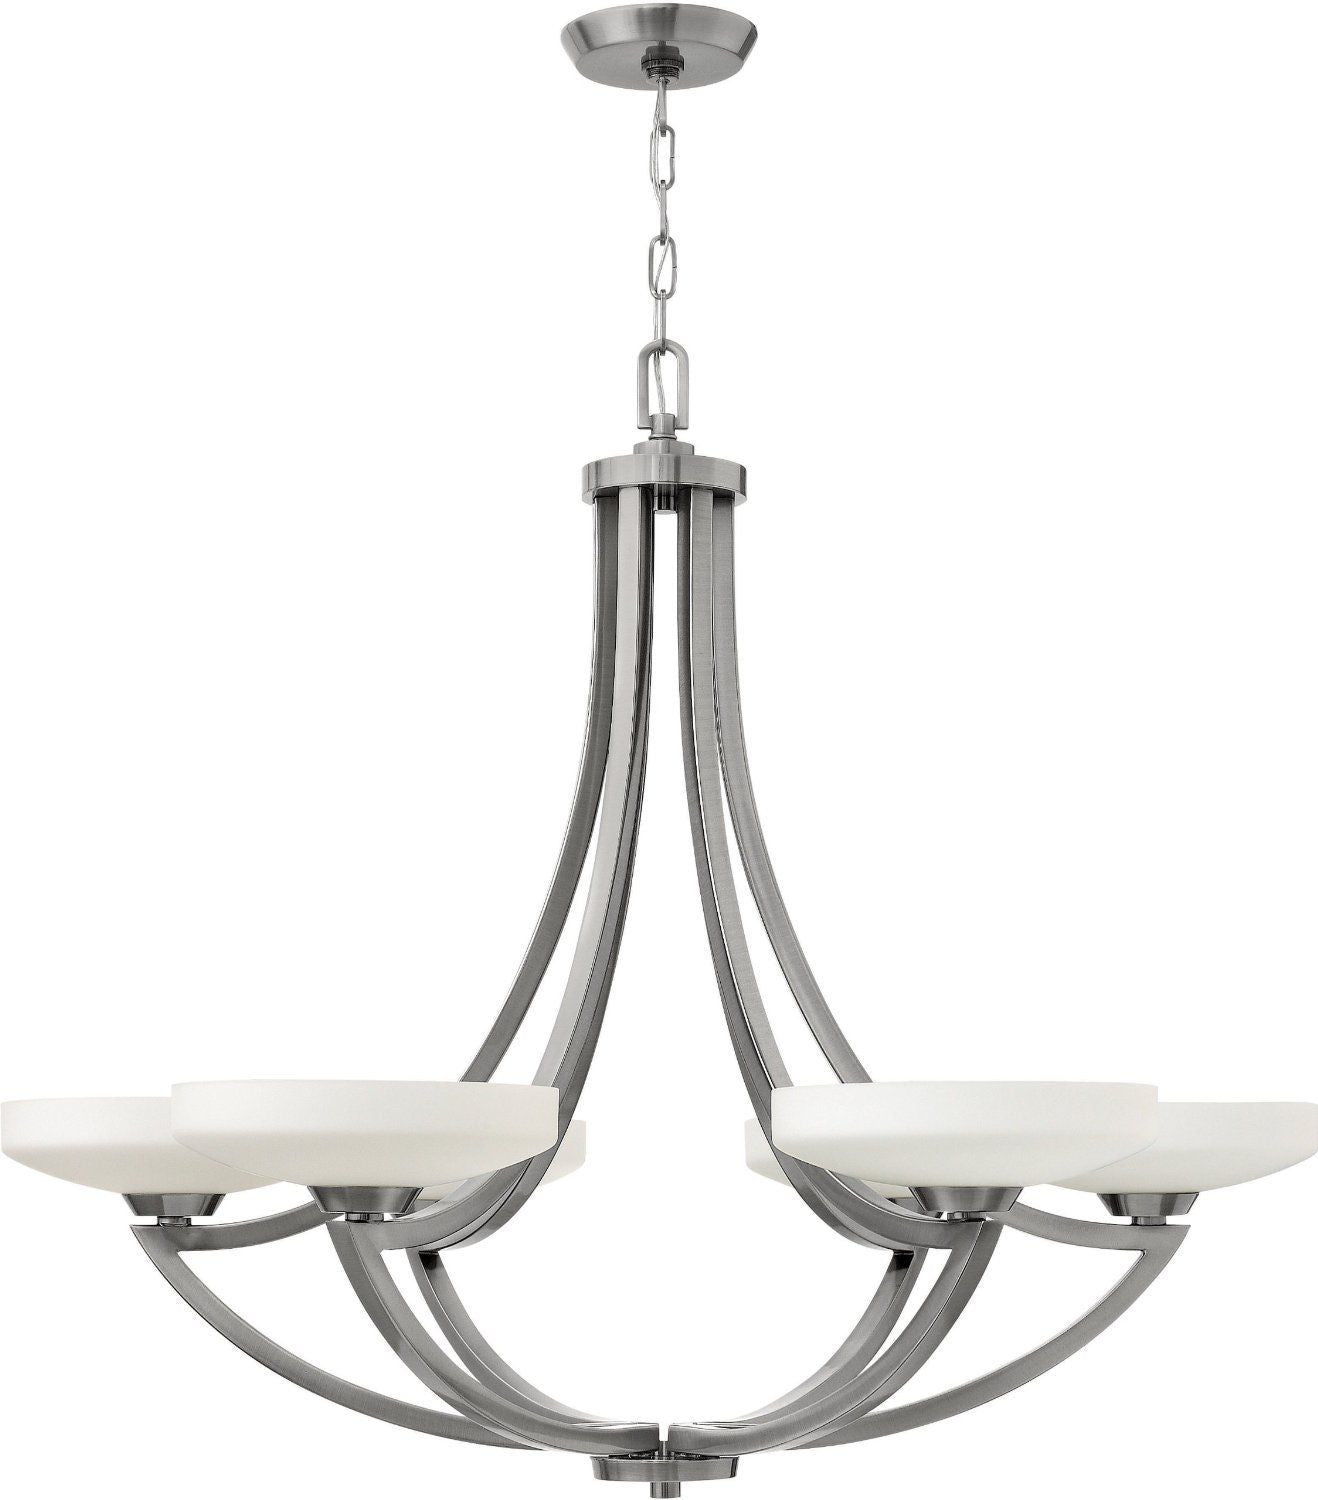 Hinkley Lighting 3966PL Darien Collection Six Light Hanging Chandelier in Polished Antique Nickel Finish